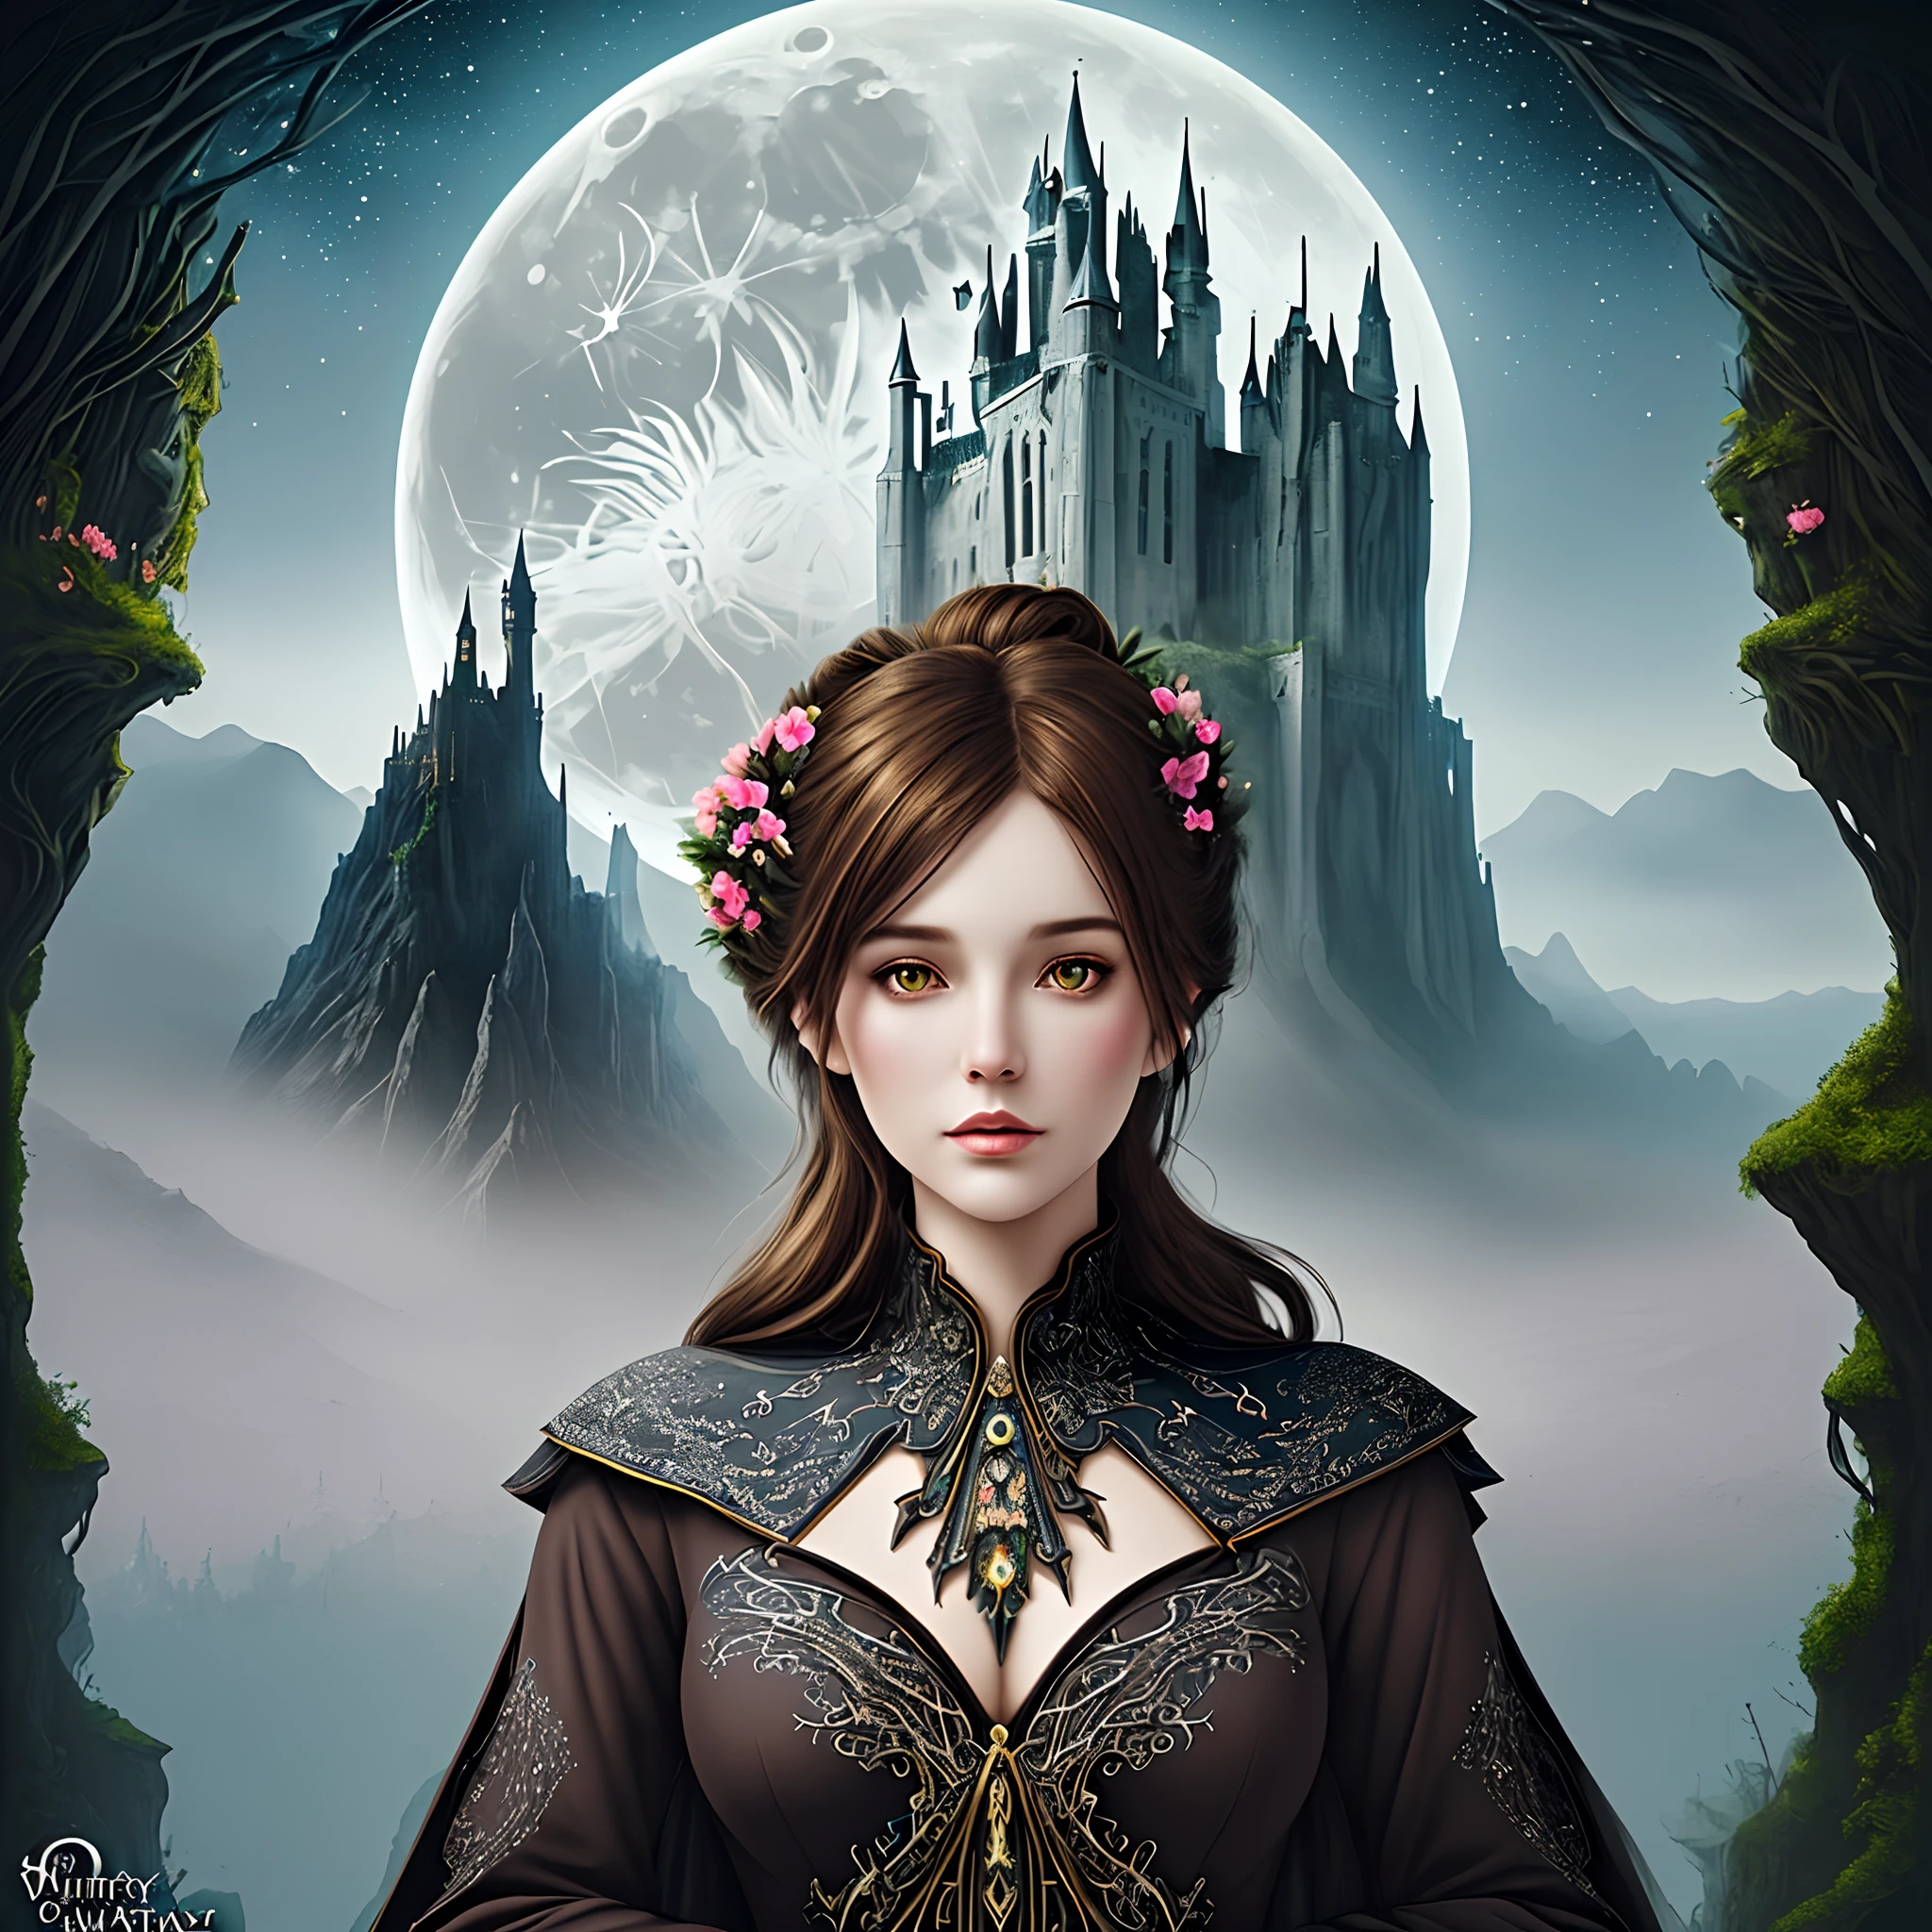 (masterpiece),(best quality), gorgeous 25 year old woman, illustration, (fantasy:1.4), witch, cute detailed digital art, beautiful face, brown hair, hair up, castle, mountain, dark color long dress, a moon, flowers , paper_cut